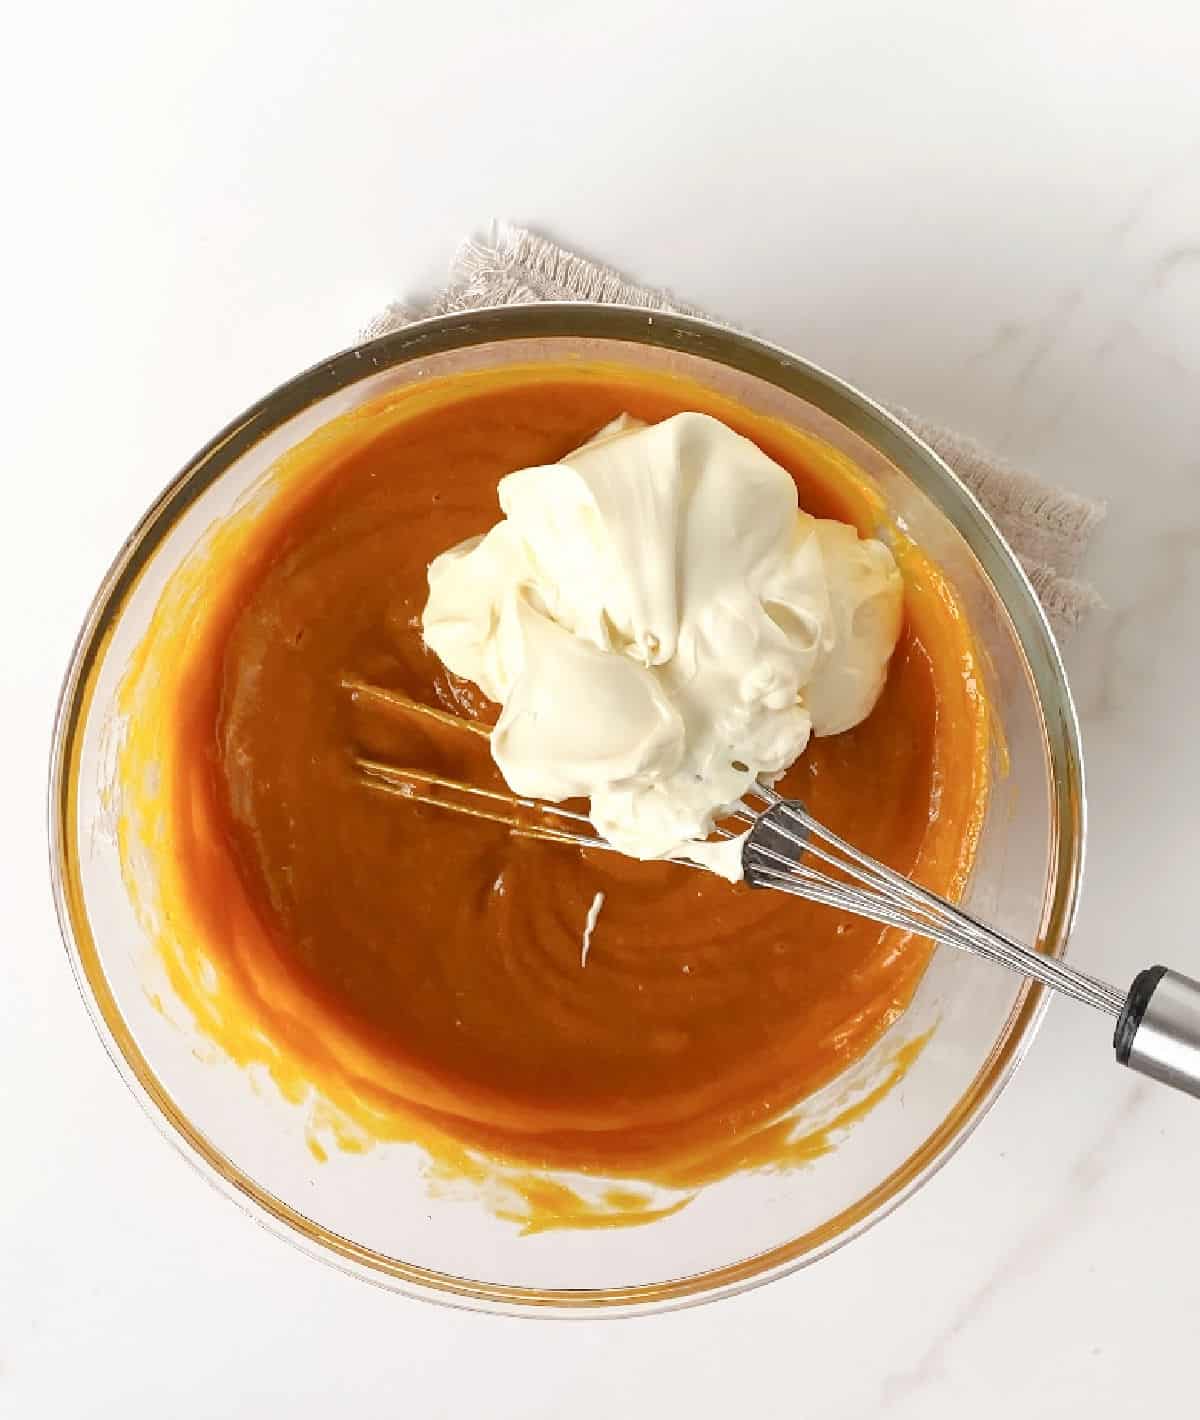 Sour cream and cream added to pumpkin pie filling in a glass bowl with a wire whisk. White marble surface.